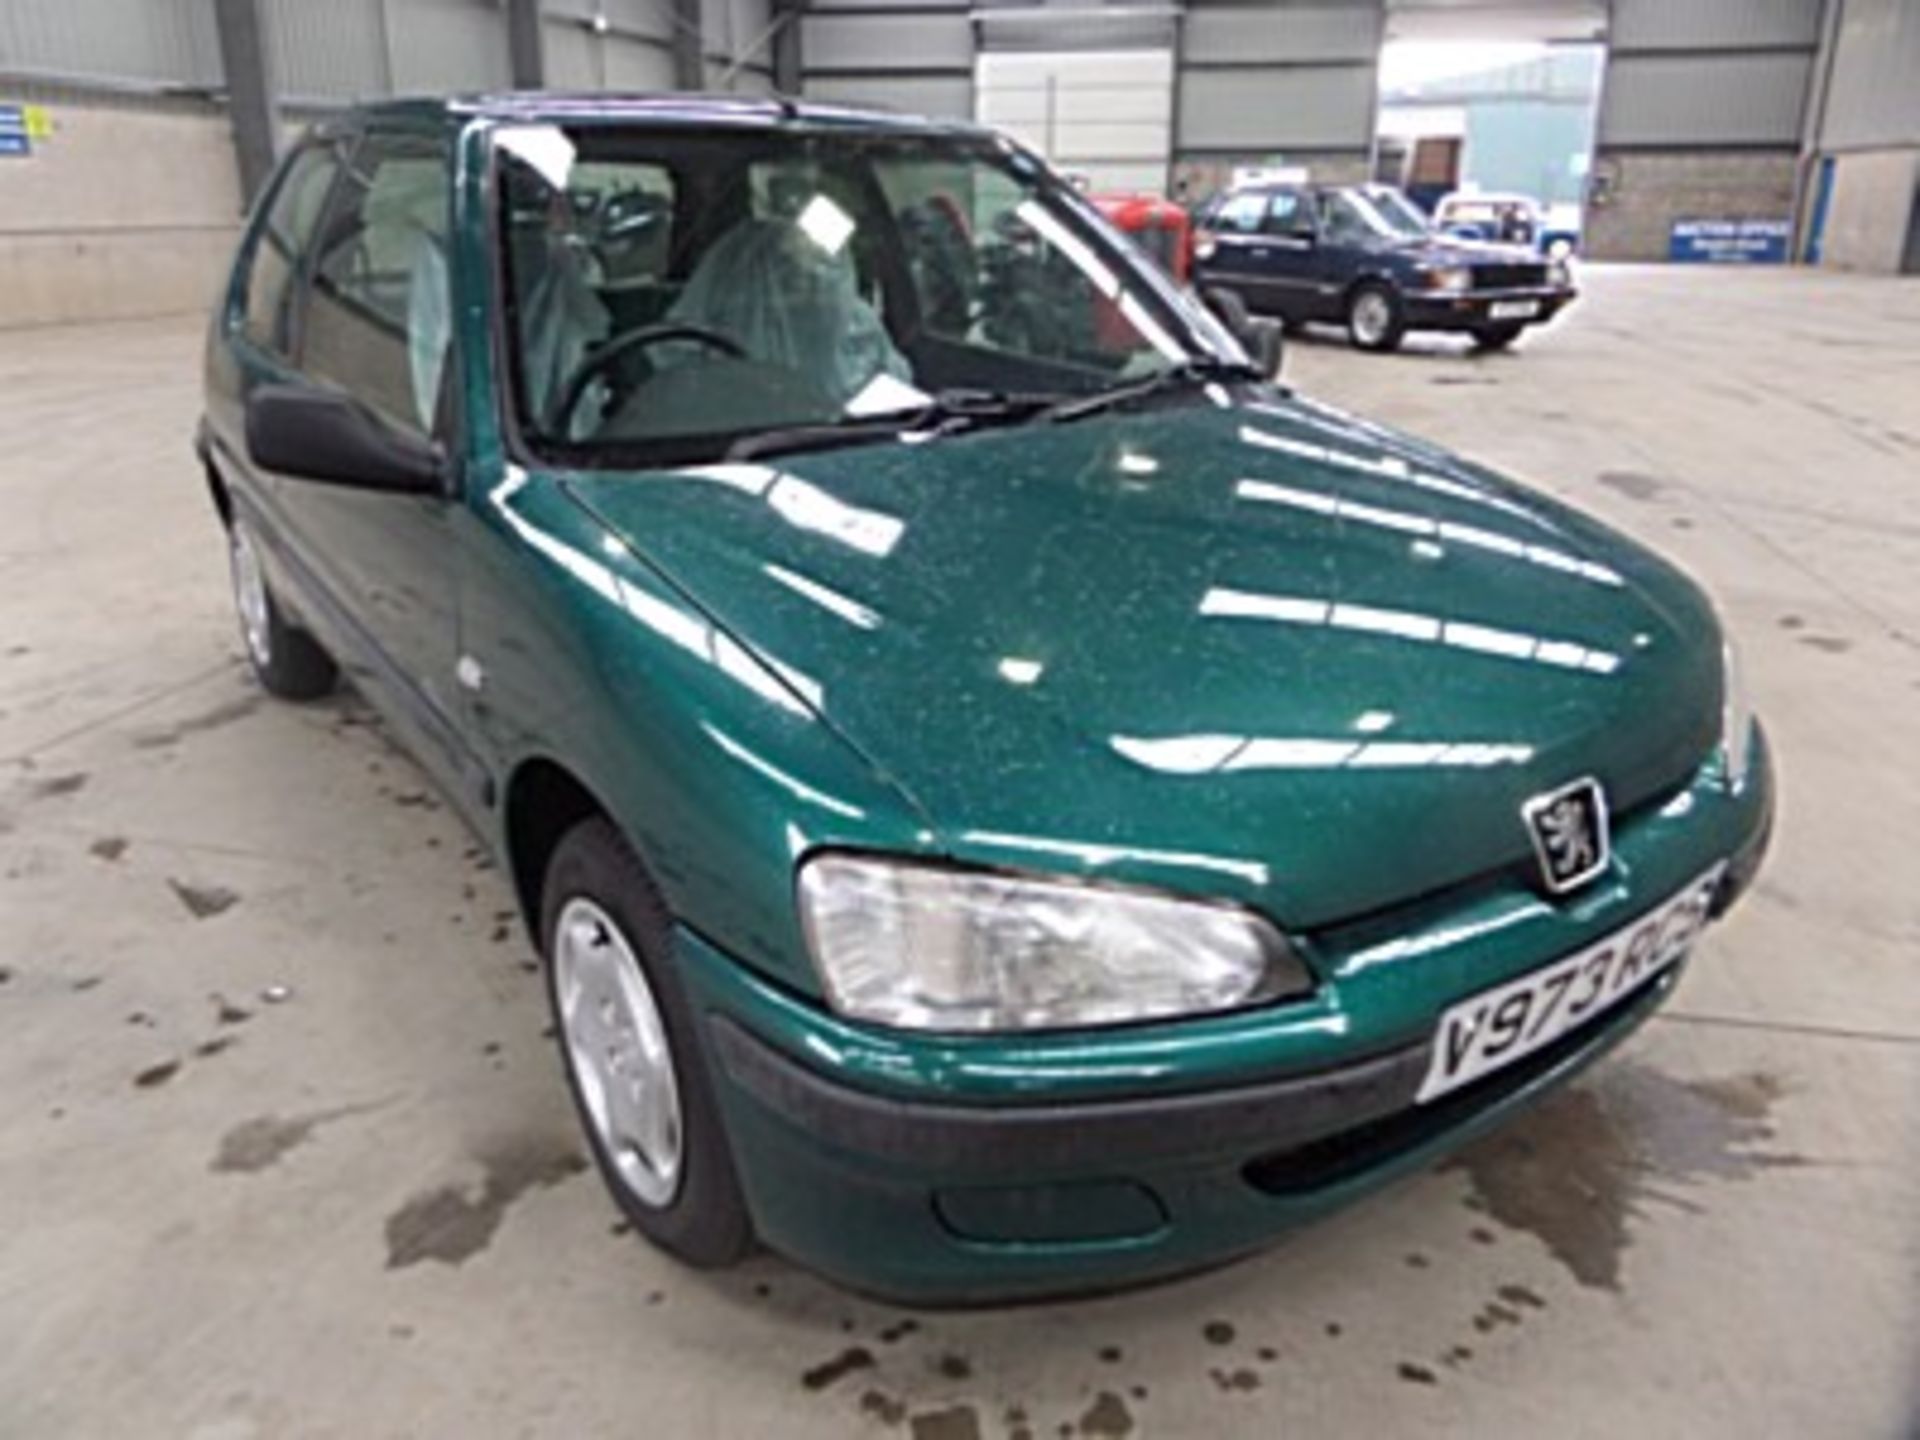 PEUGEOT, 106 XN ZEST 2 - 1124cc, Chassis number VF31CHDZE52504218 - this one owner from new